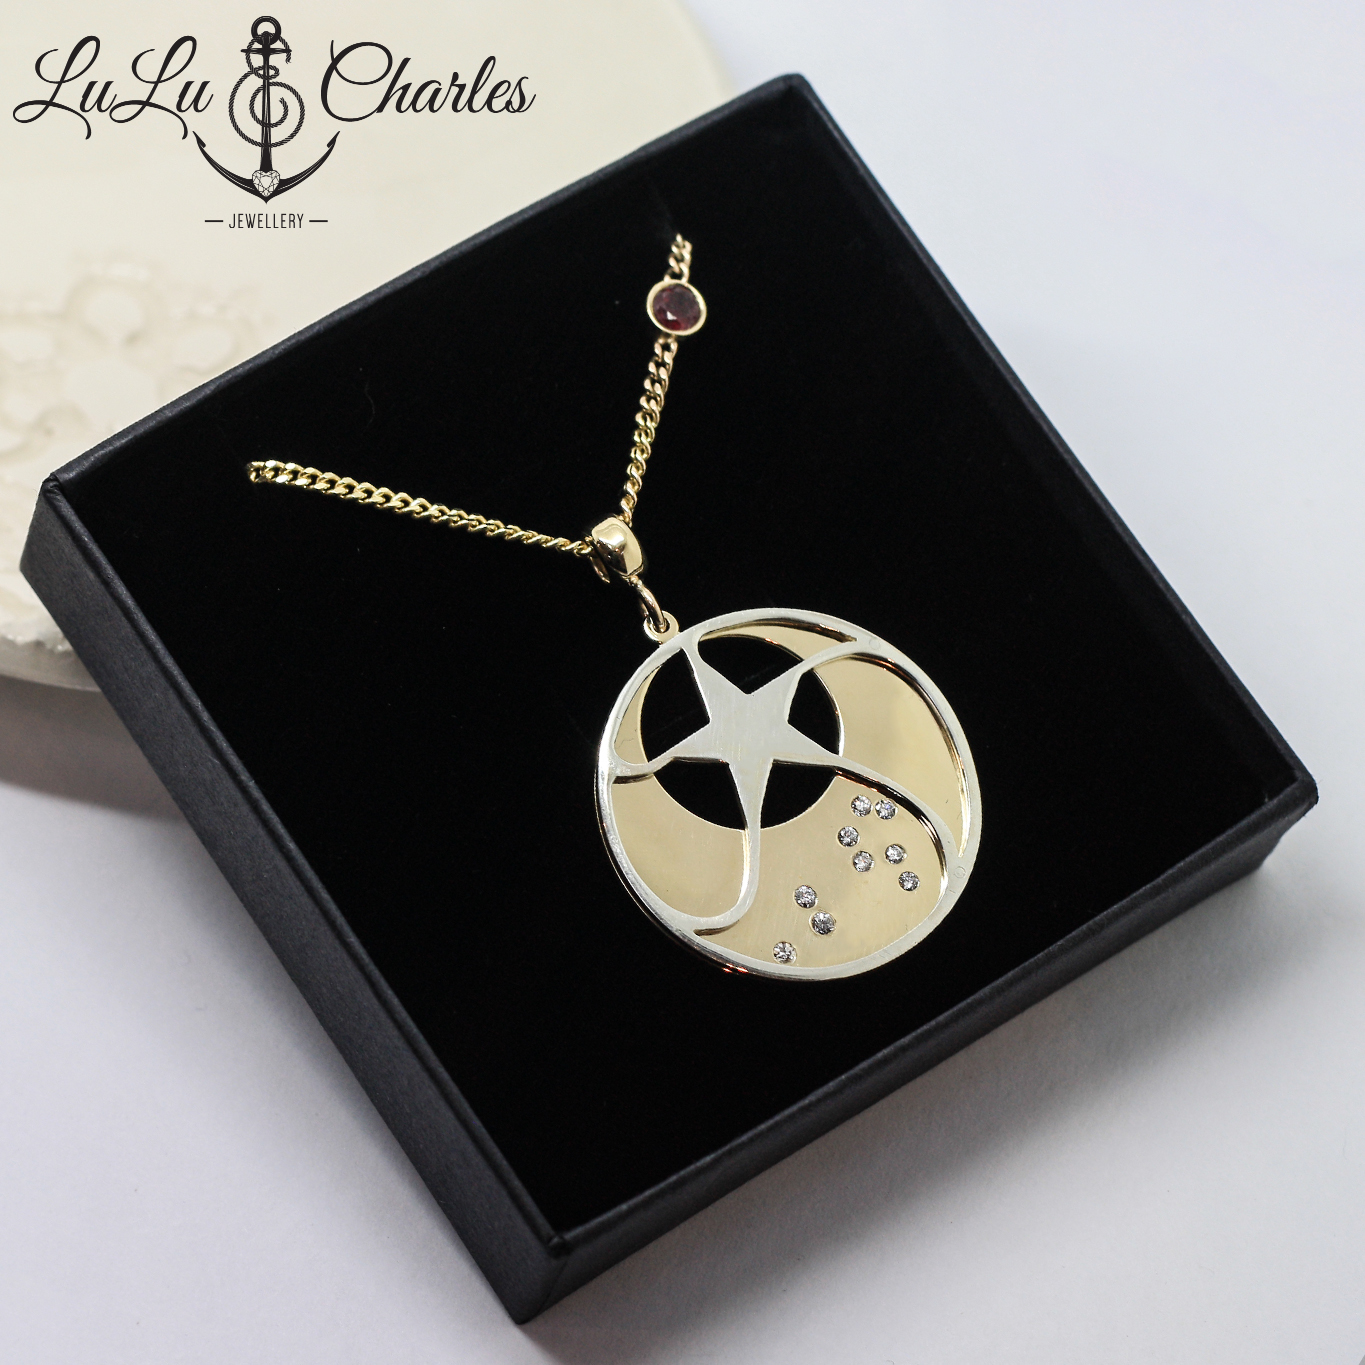 Handmade Bespoke Sterling Silver & 9ct Yellow Gold Leo Star Sign Necklace, with diamond set constellation, handmade by lulu & charles jewellery uk